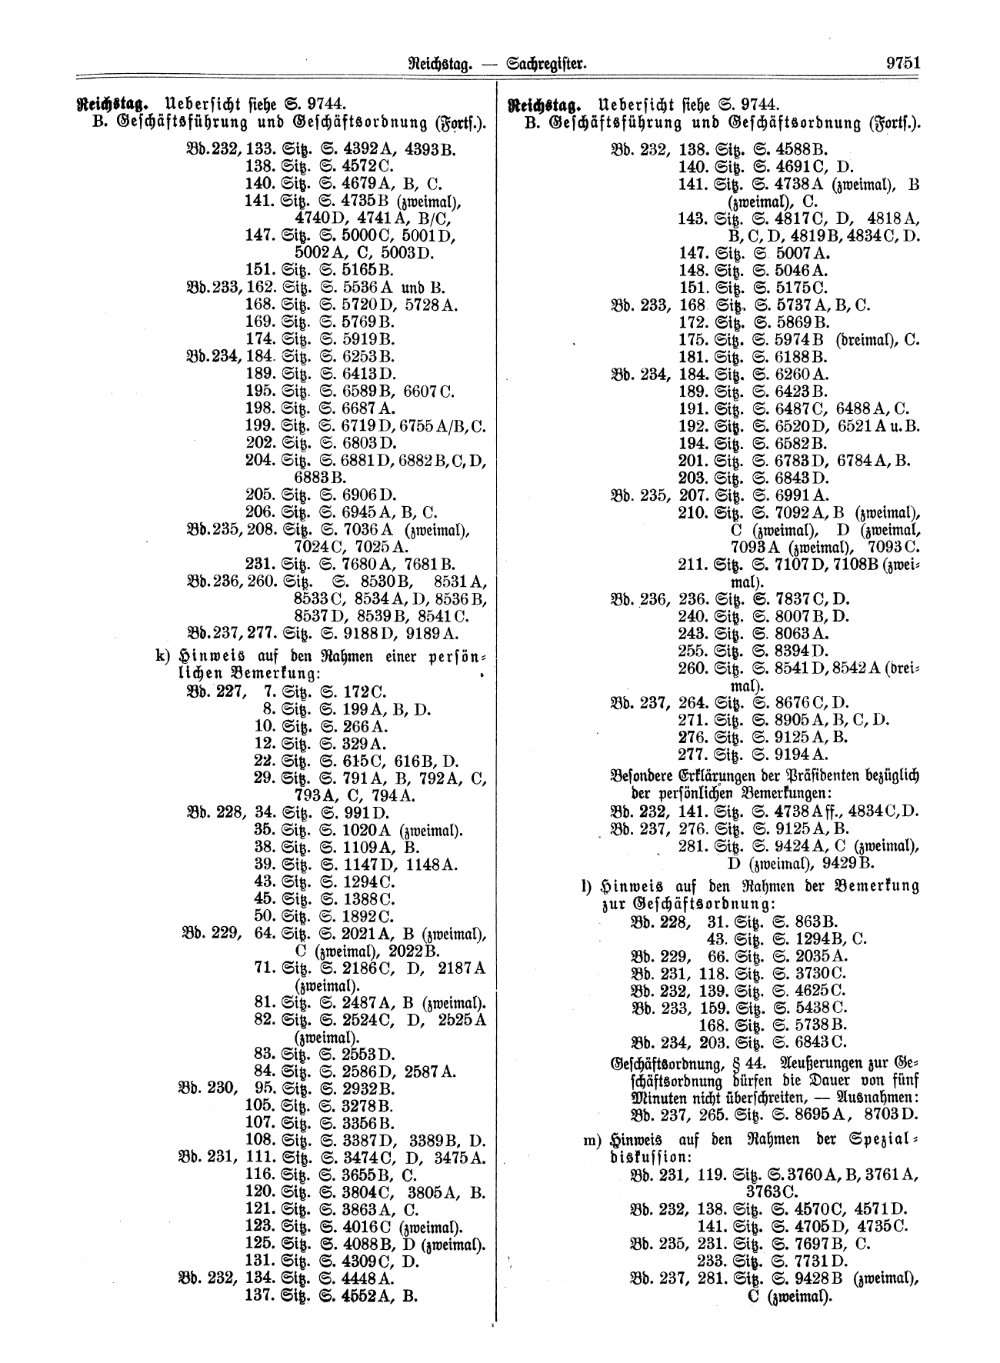 Scan of page 9751